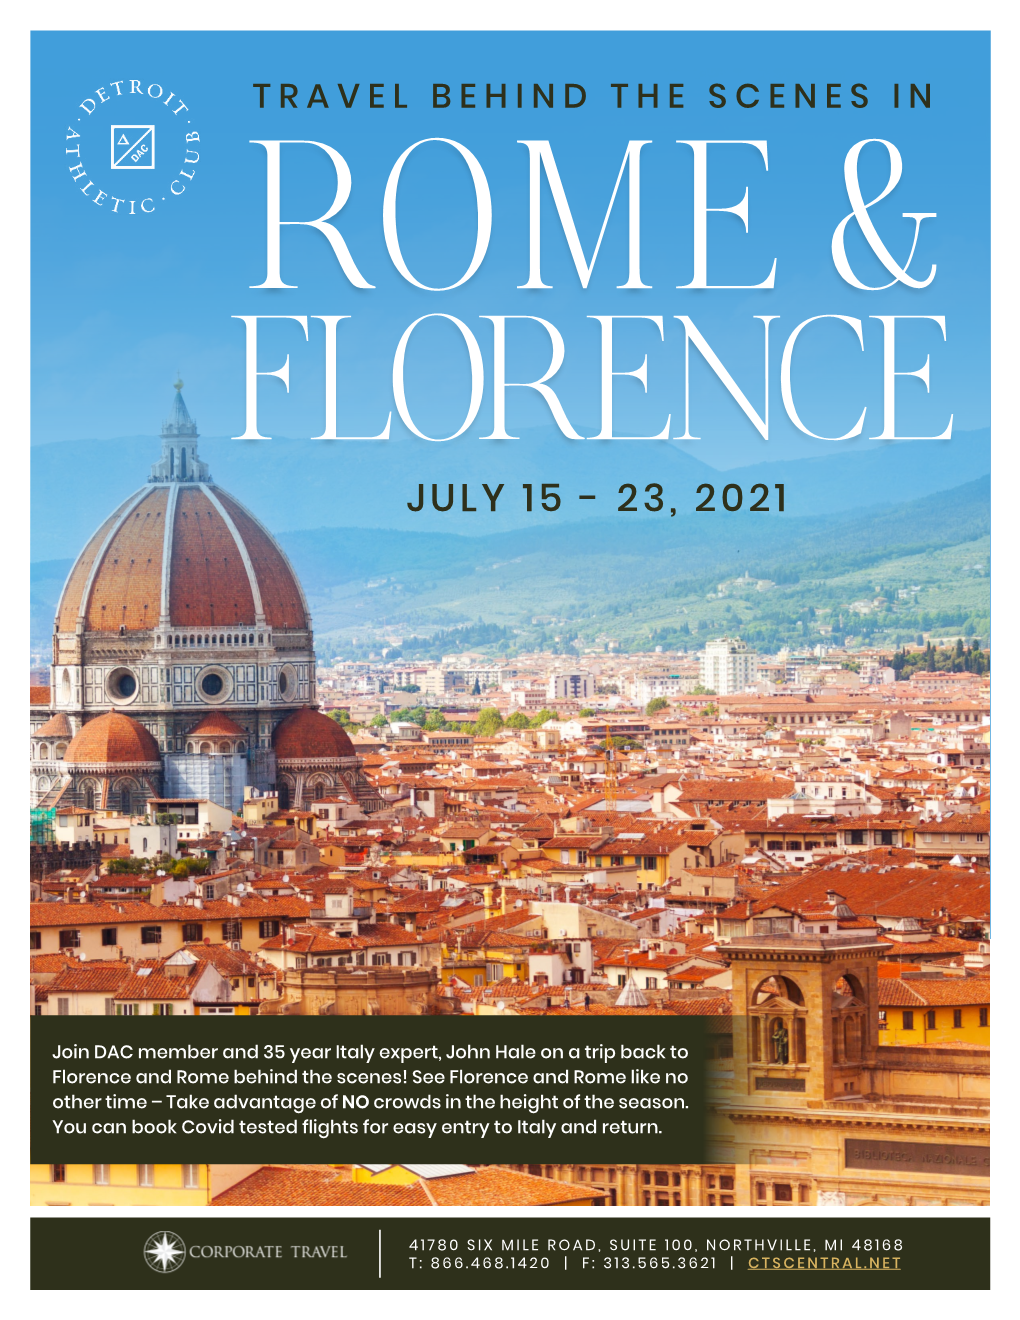 Rome & Florence July 15 - 23, 2021